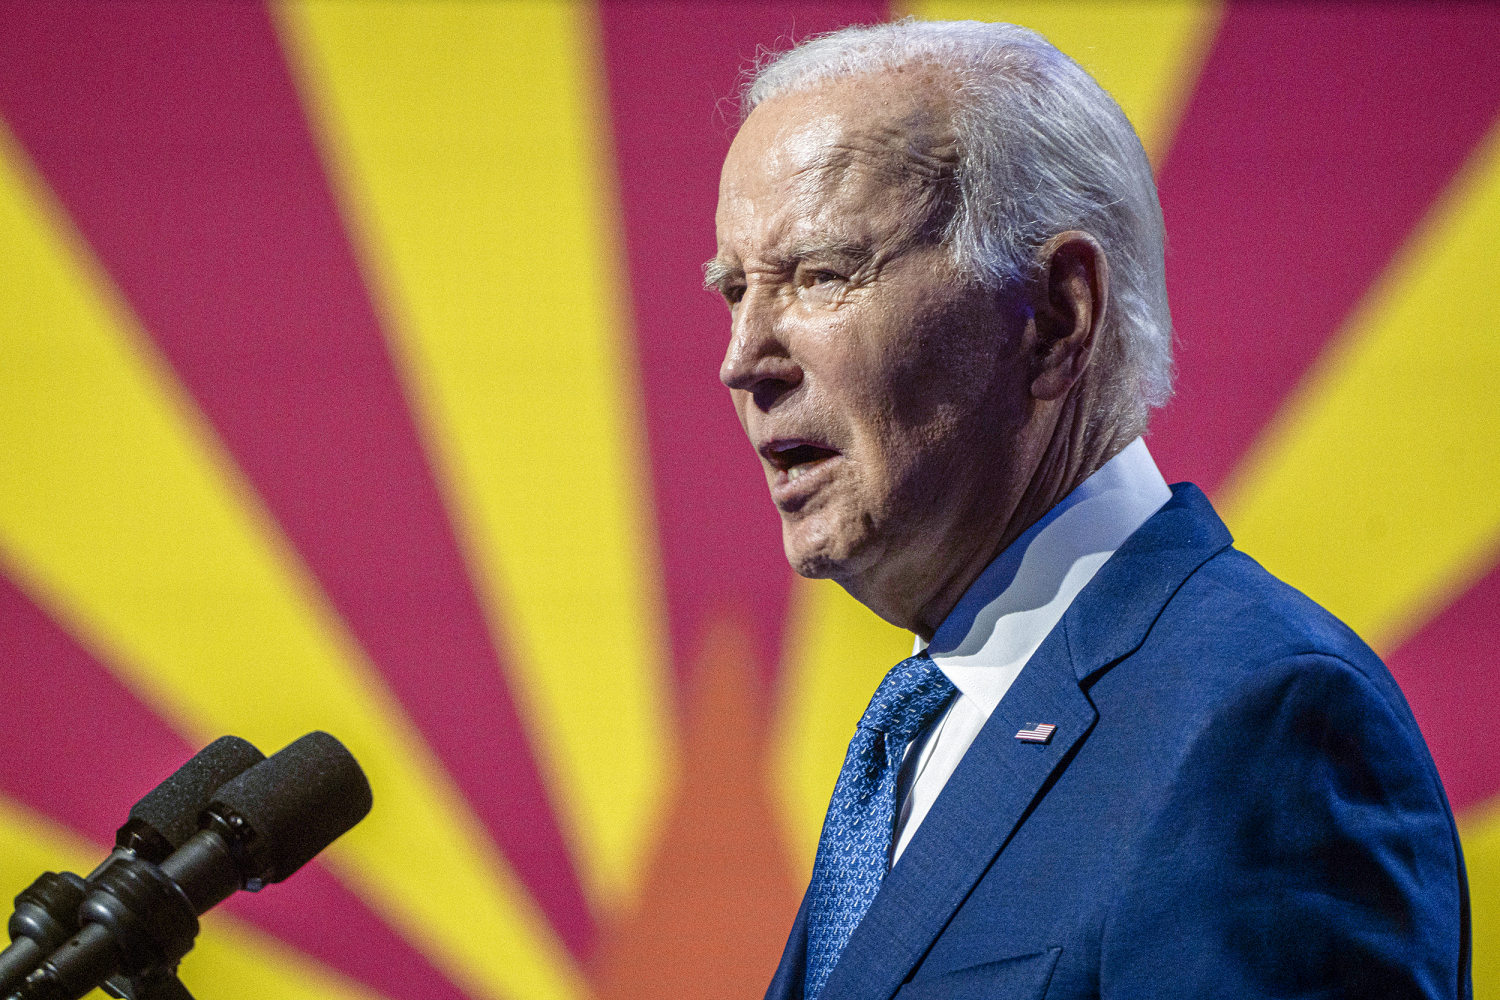 Abortion will likely be on the ballot in Arizona, but it's not yet giving Biden a boost